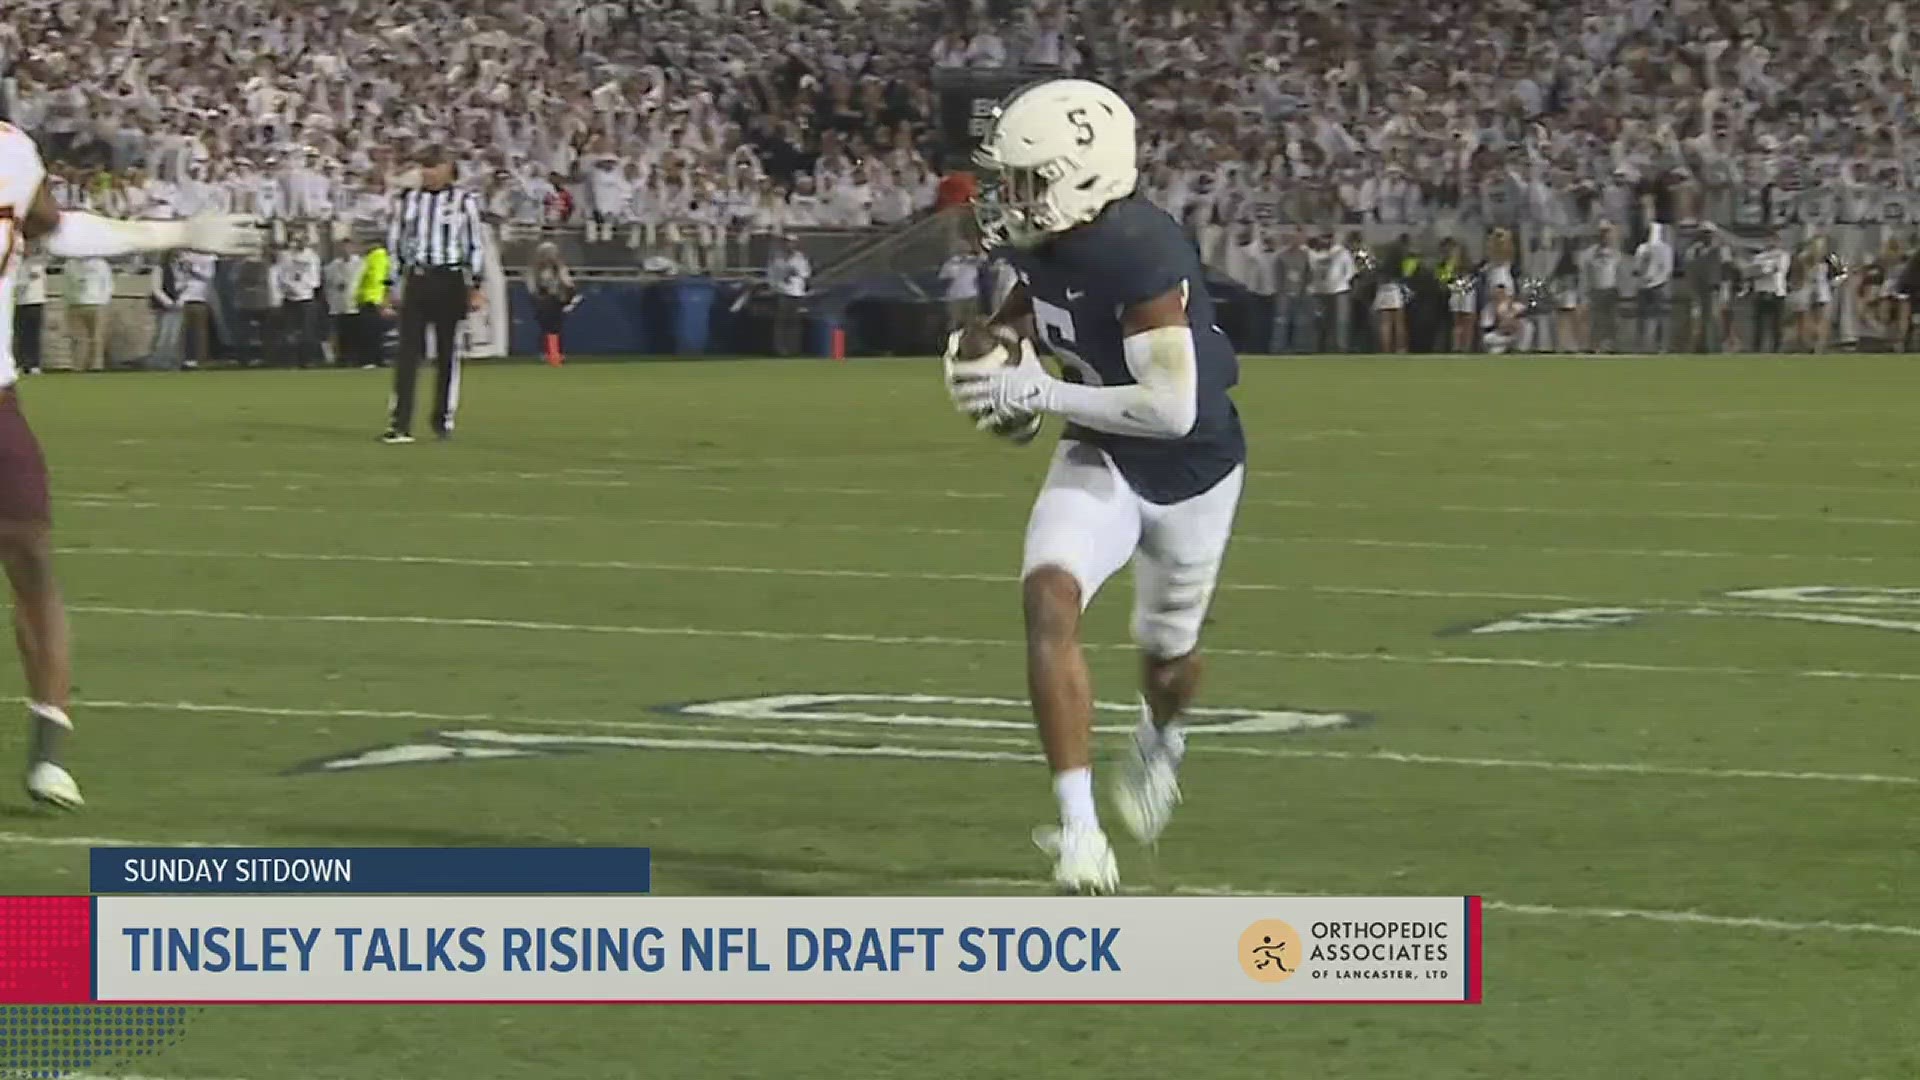 Tinsley's draft stock has steadily increased since the end of the season and he joins the Frenzy to talk about what he plans to bring to NFL teams